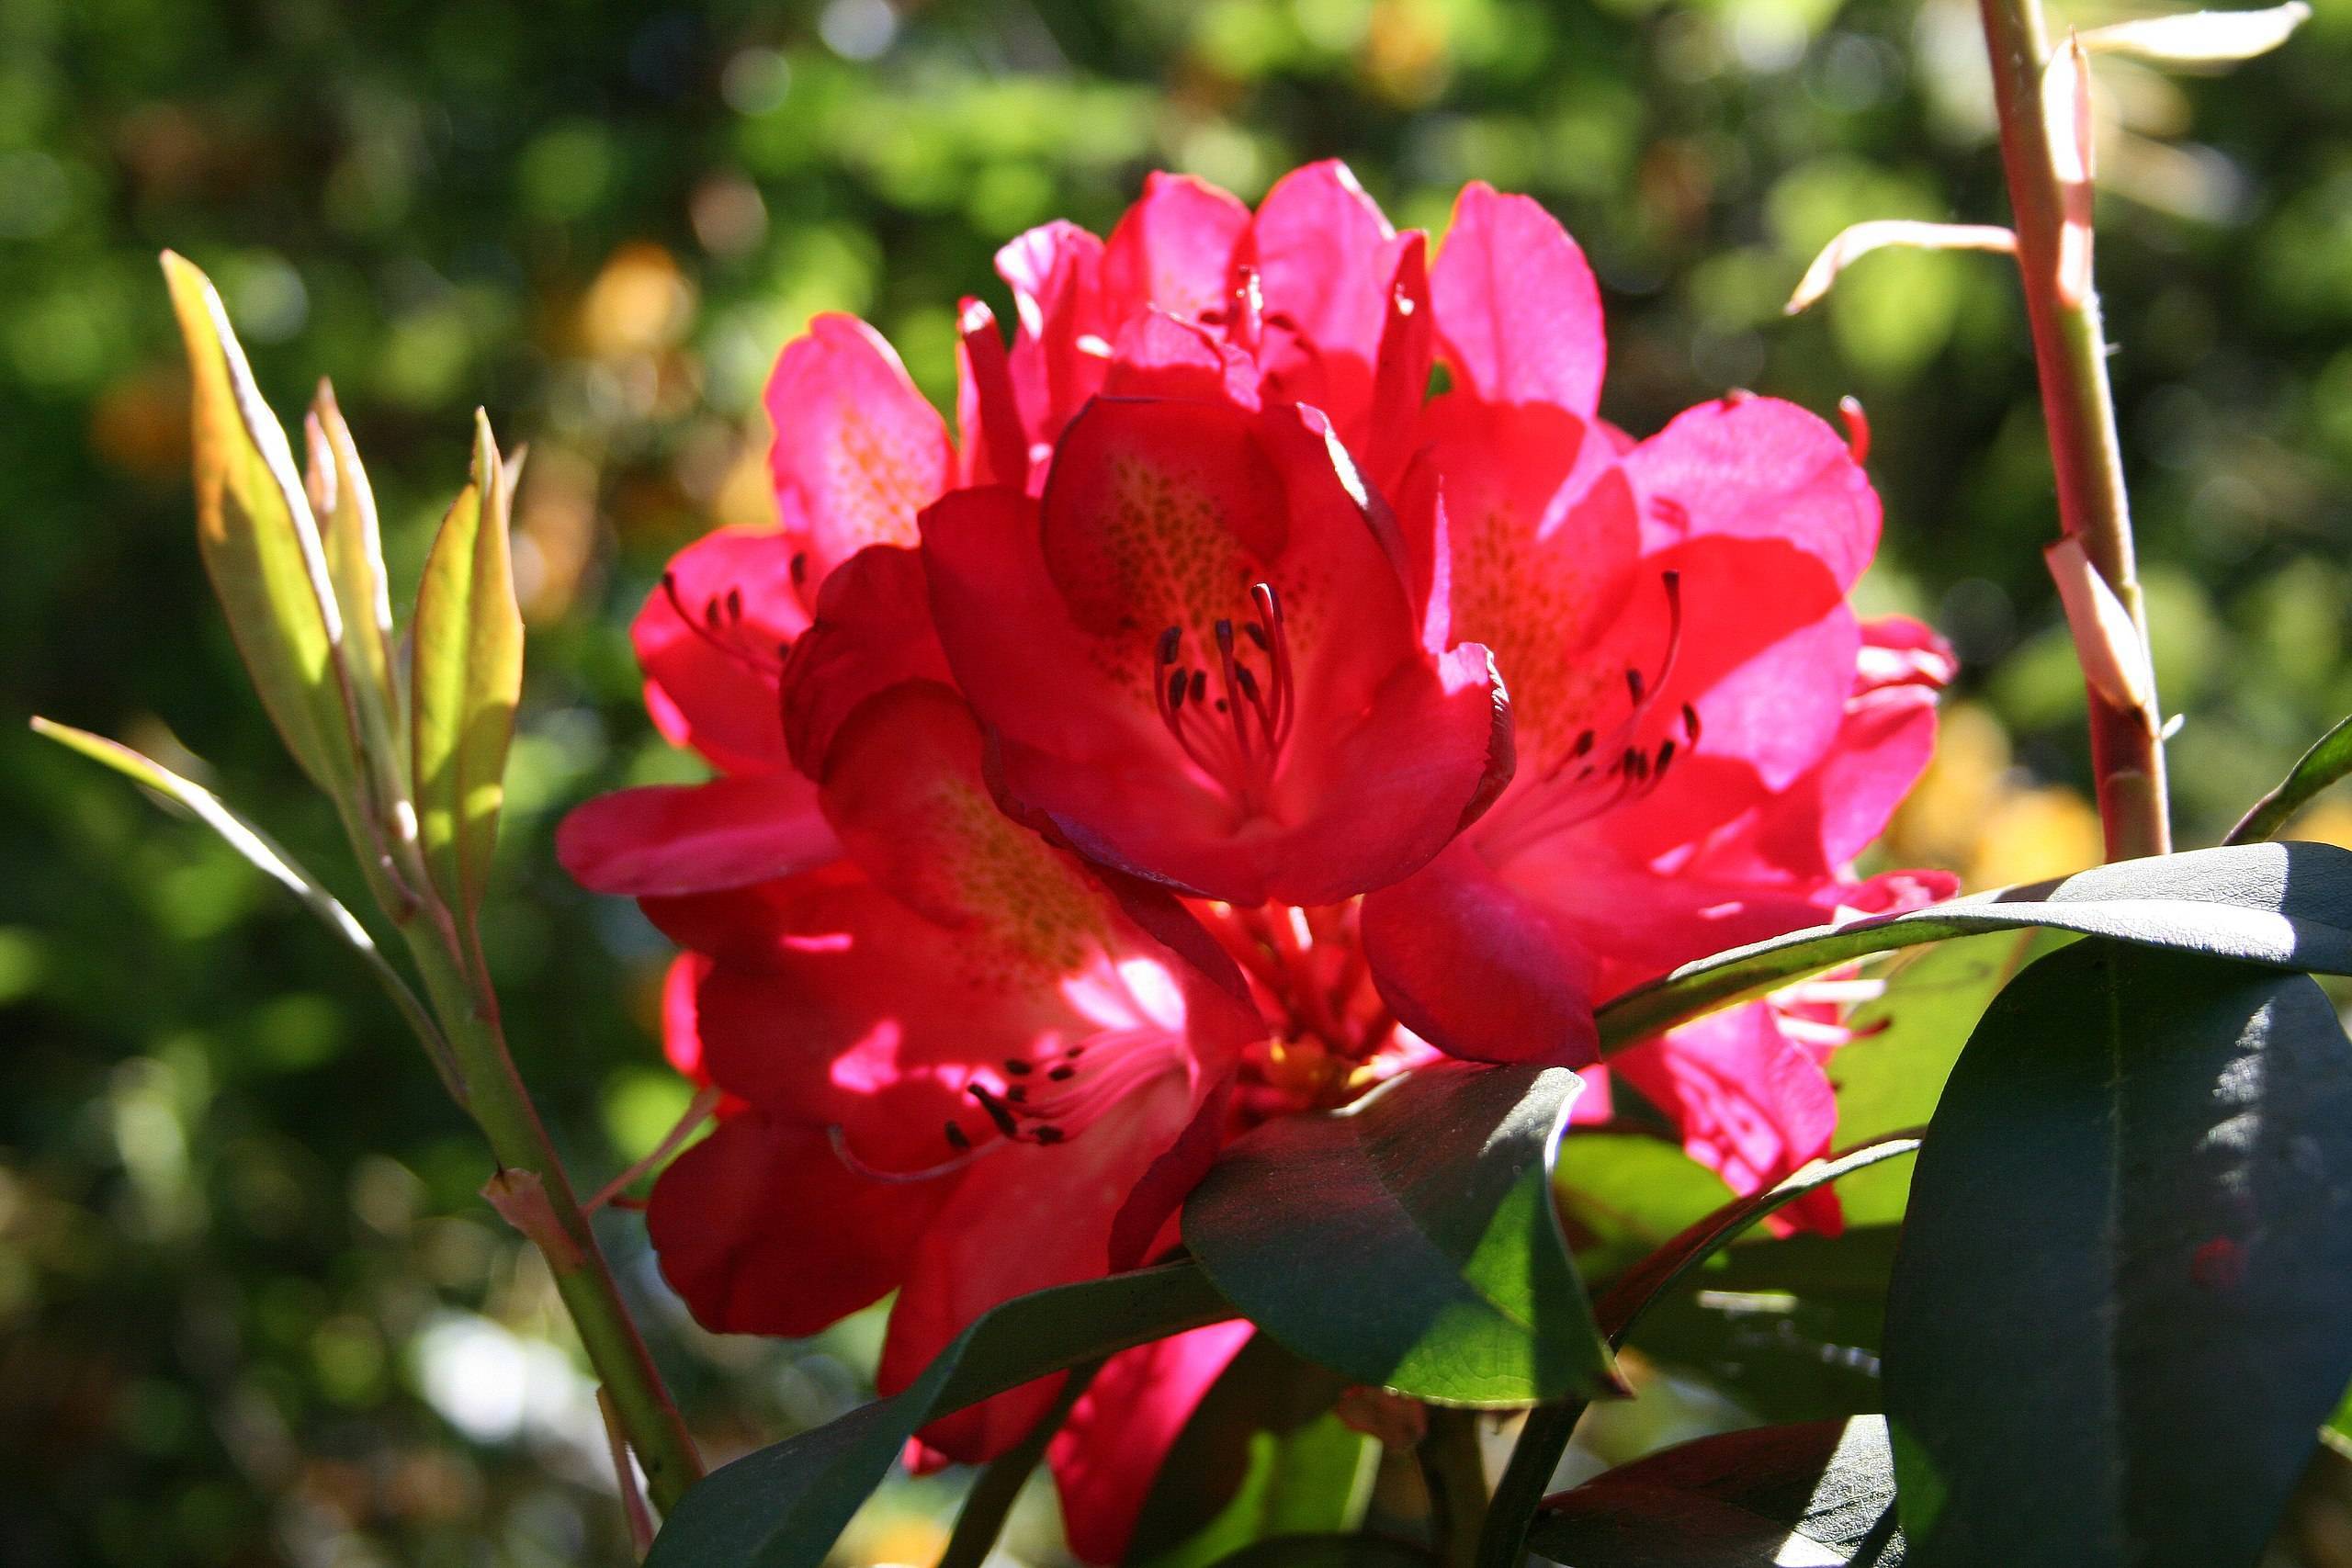 red-pink flowers with pink filaments, black anthers, green leaves and green stems